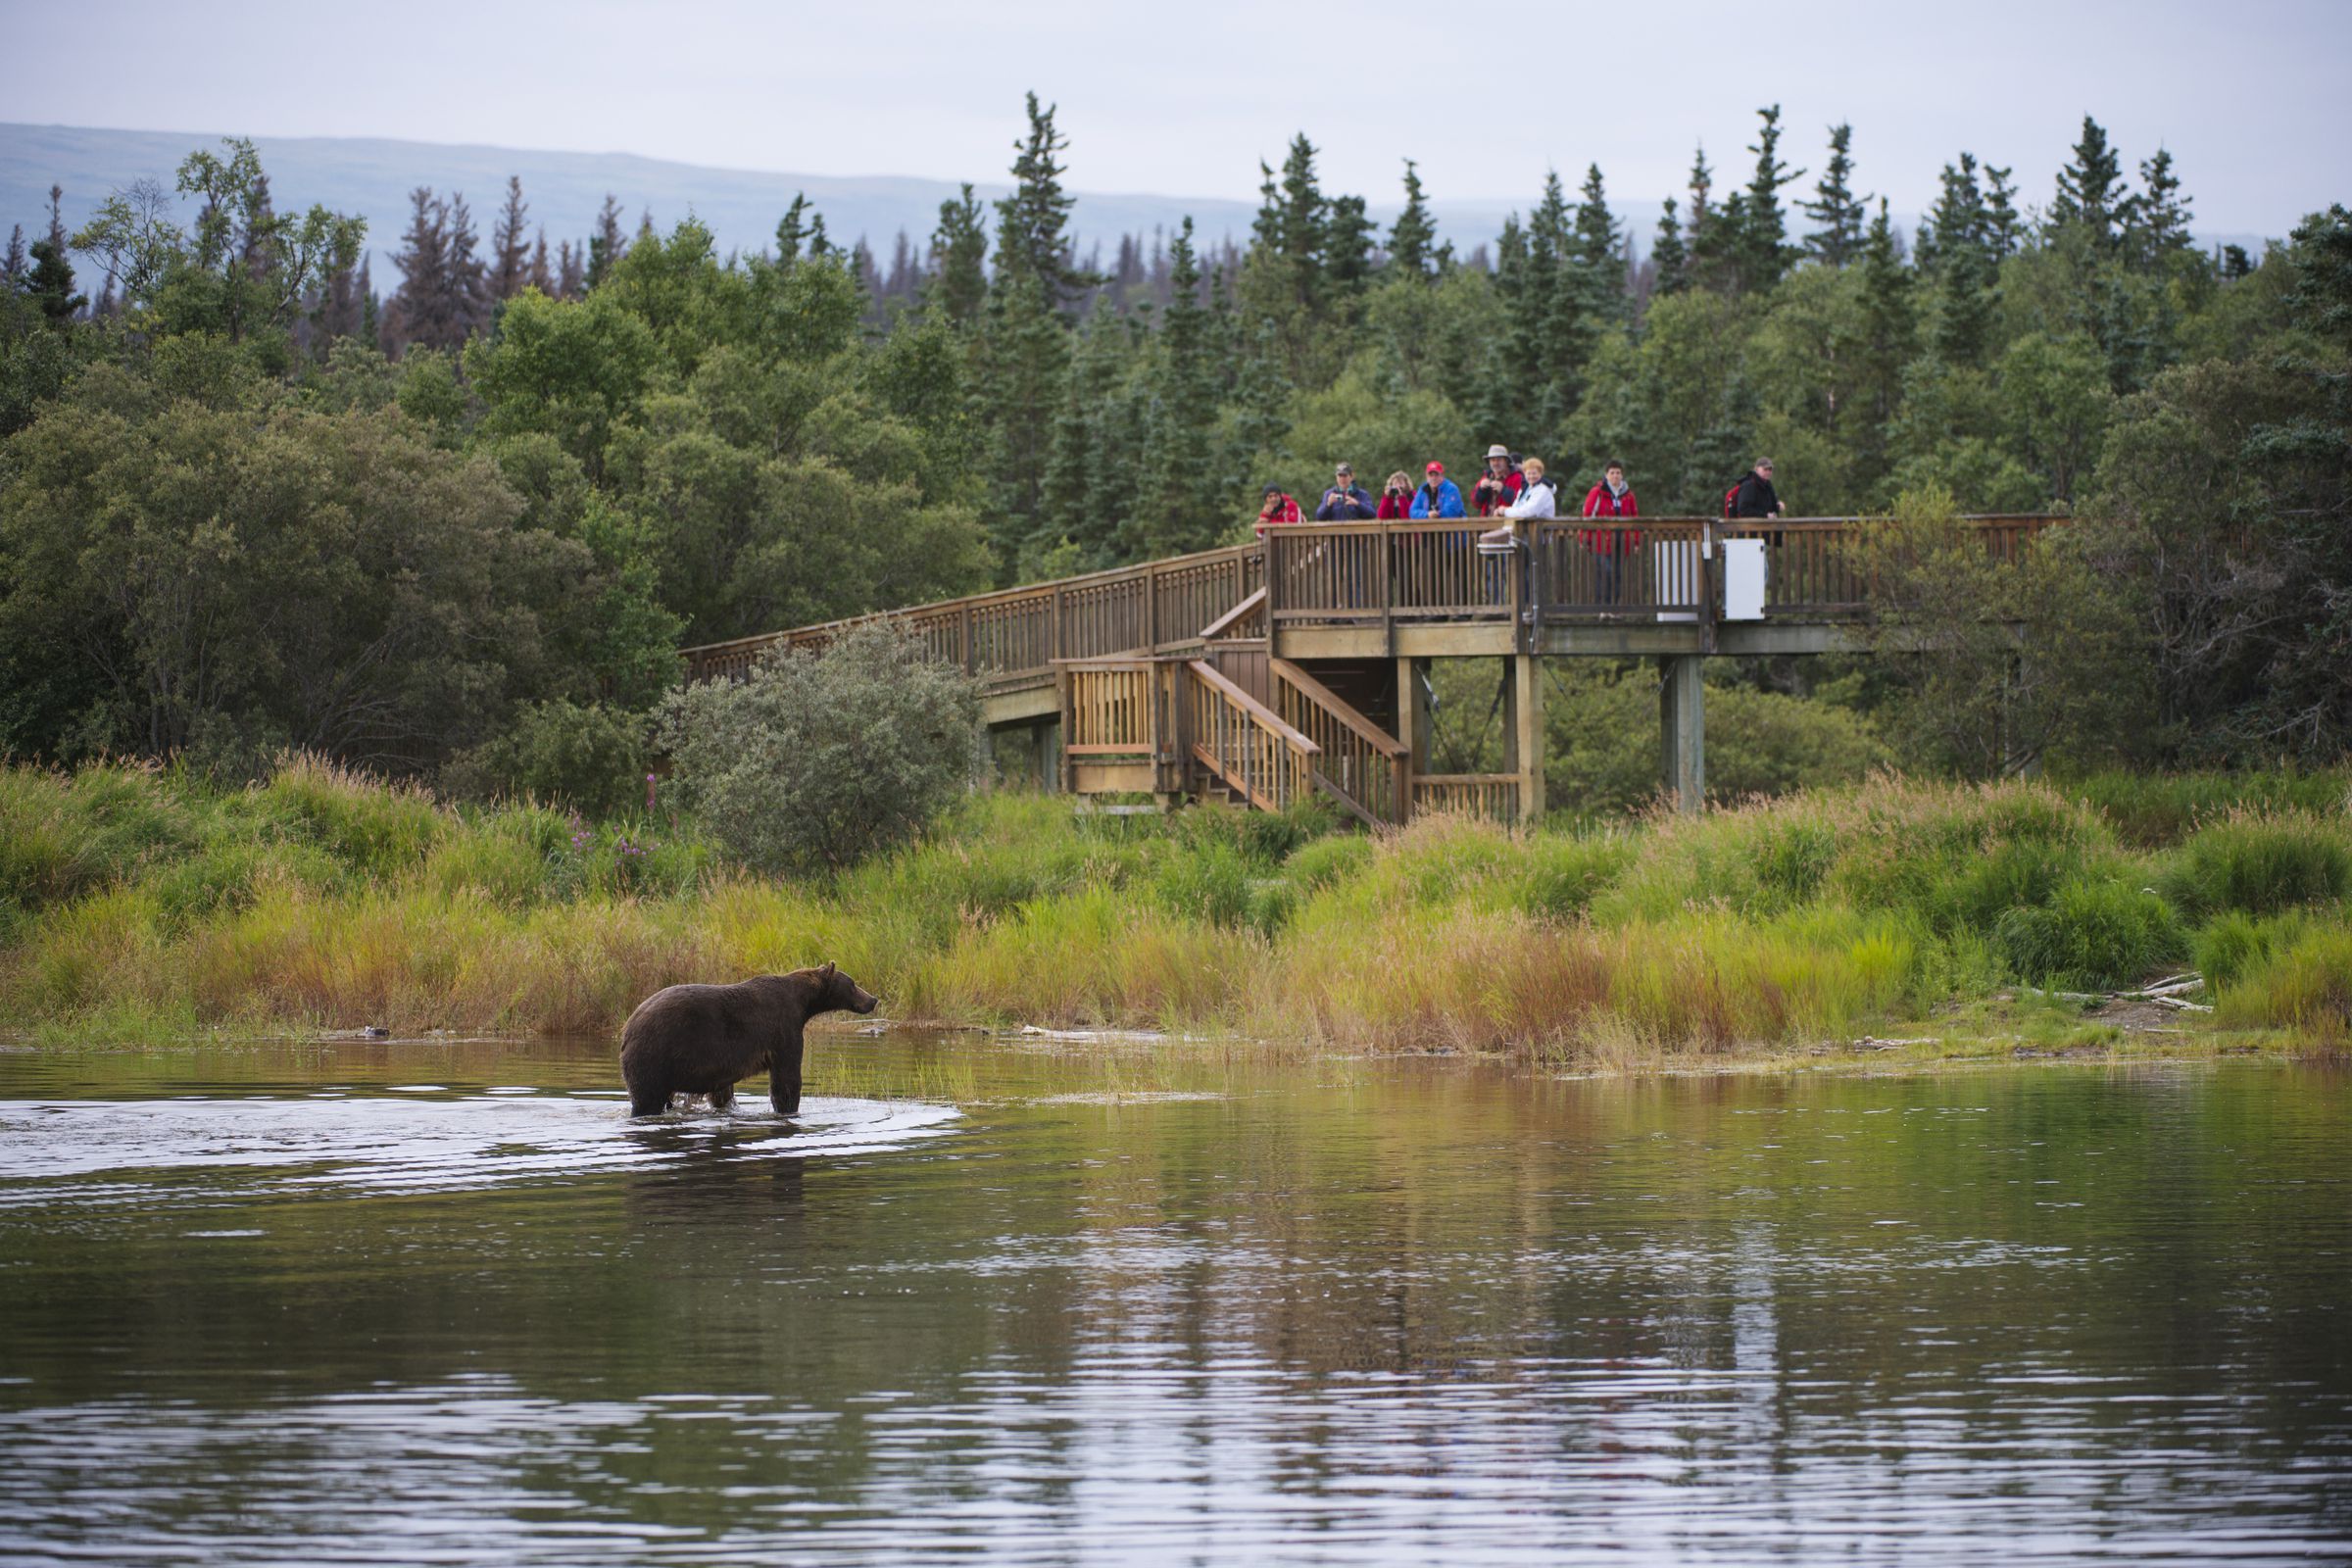 People stand on an elevated observation platform looking down at a brown bear wading along the edge of a lake.